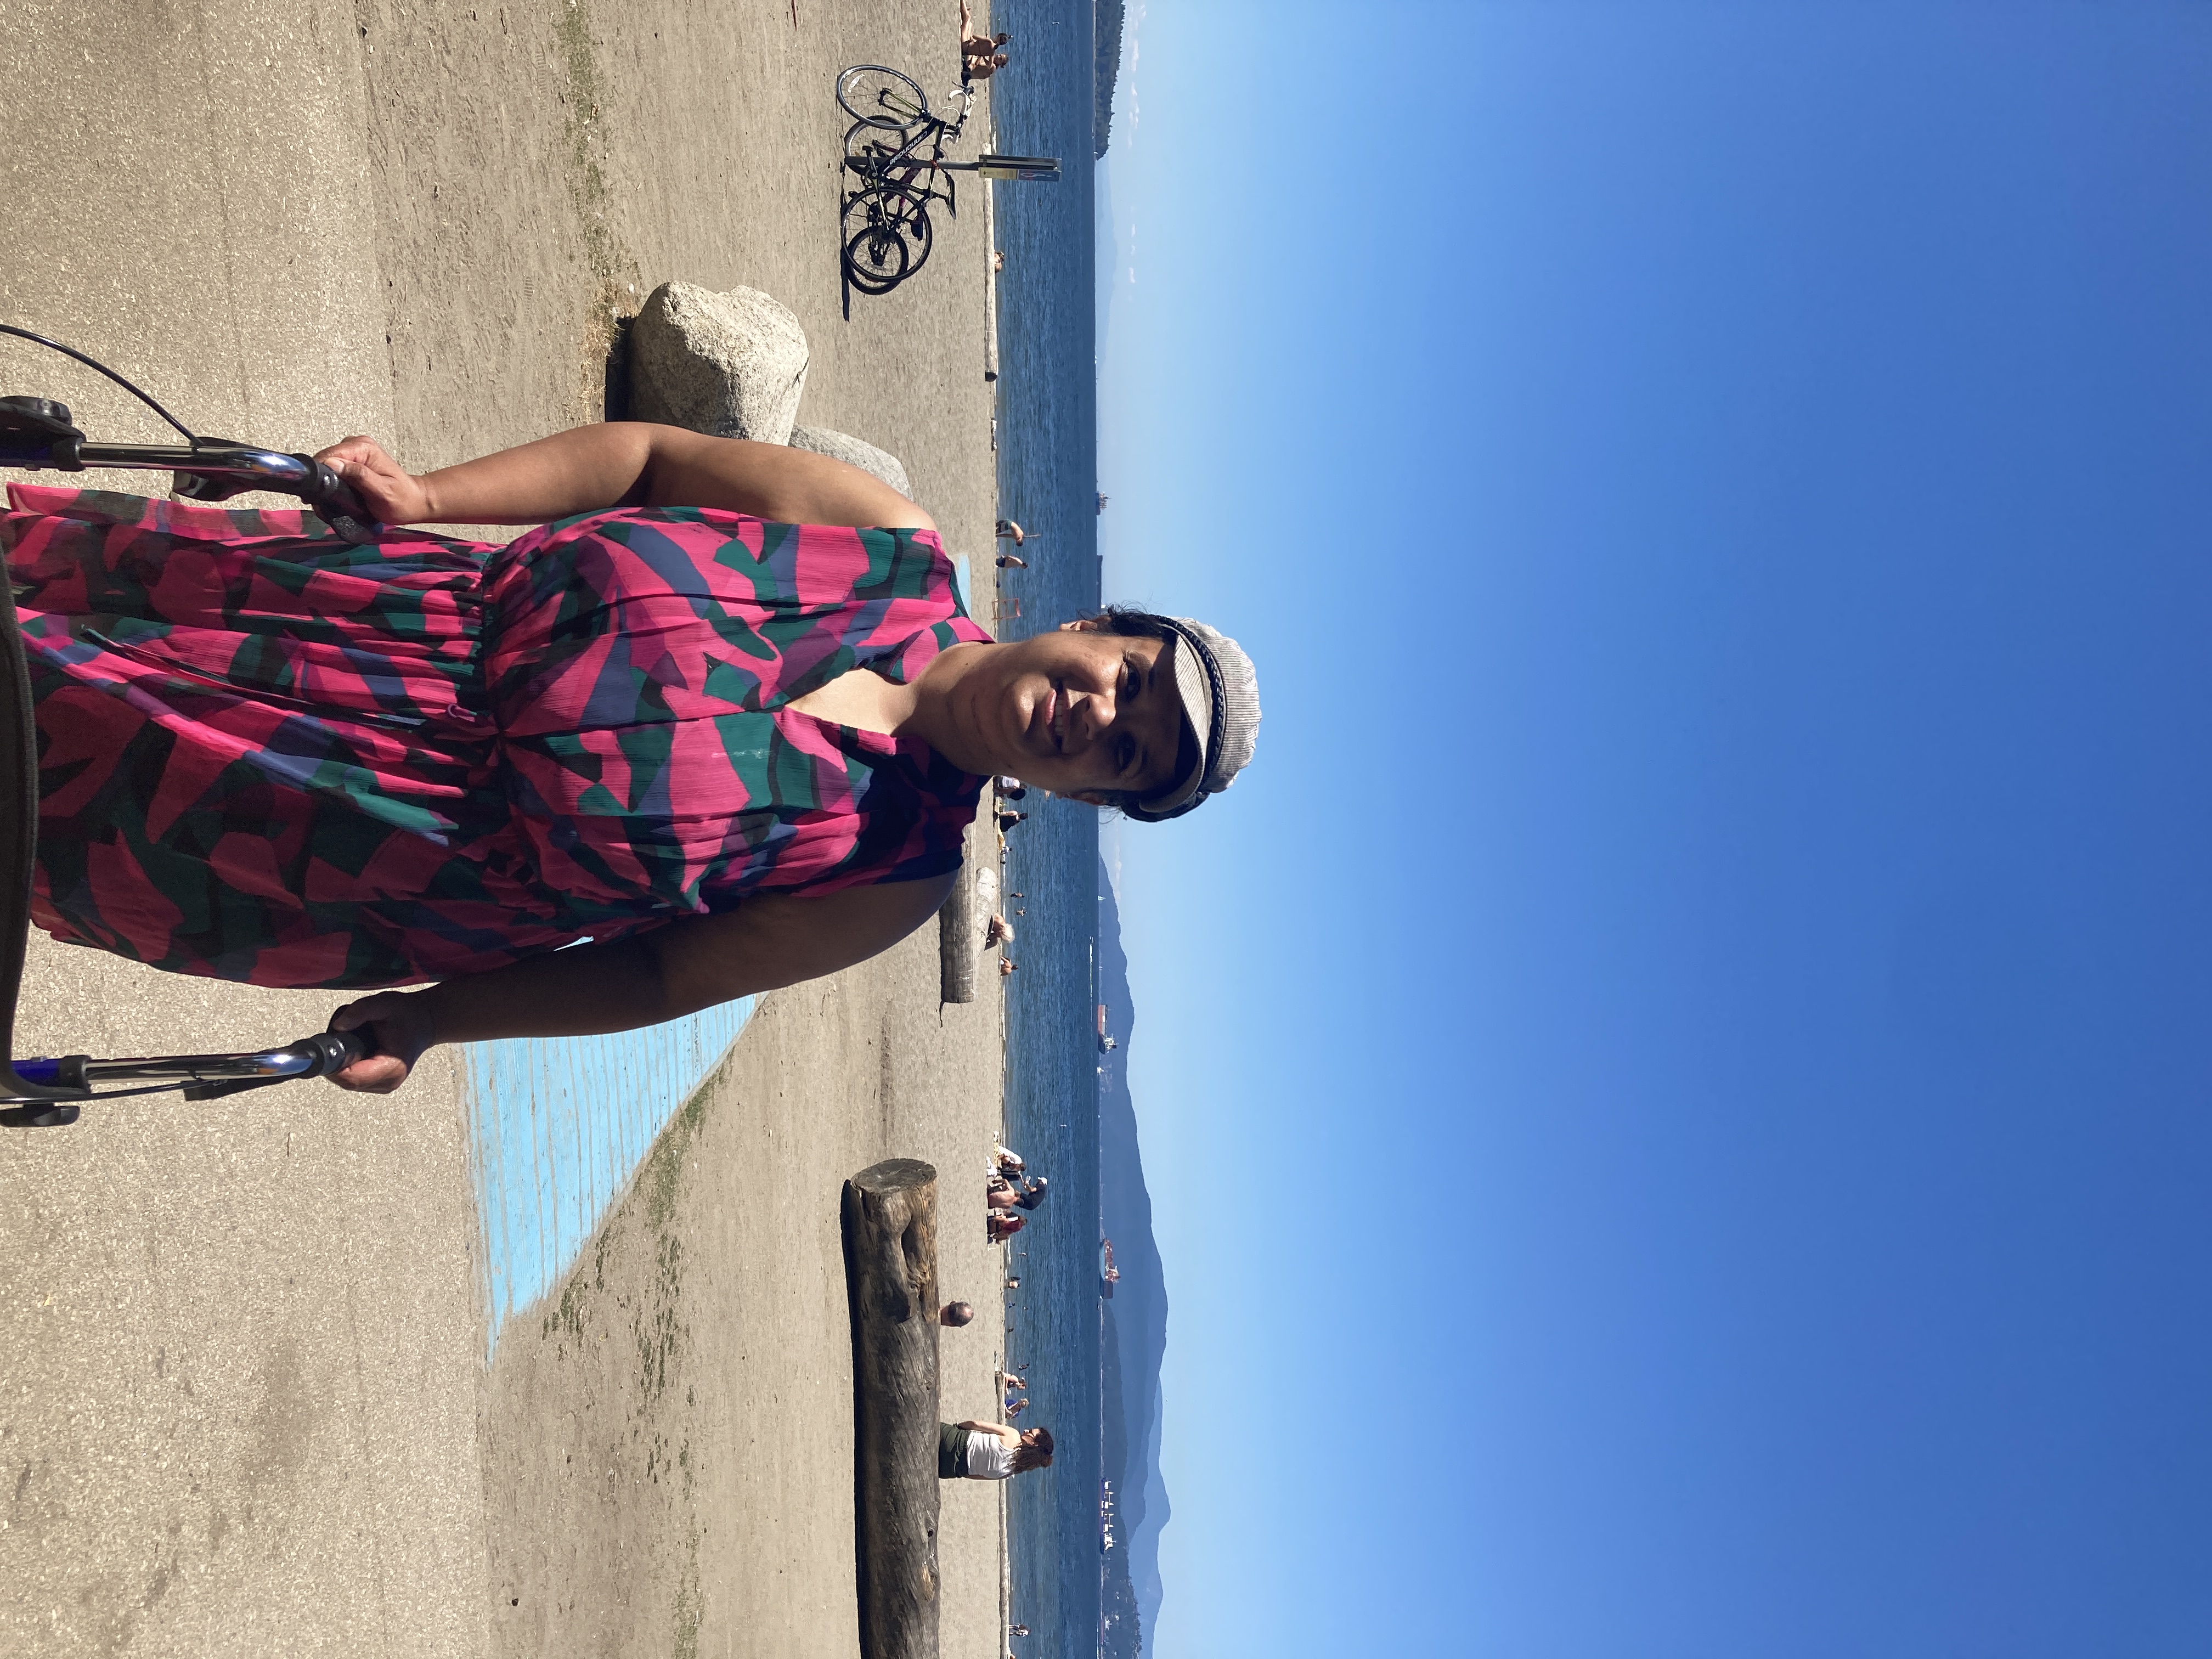 Kristy stands supported by her walker with the ocean and sand of English Bay, Vancouver behind her